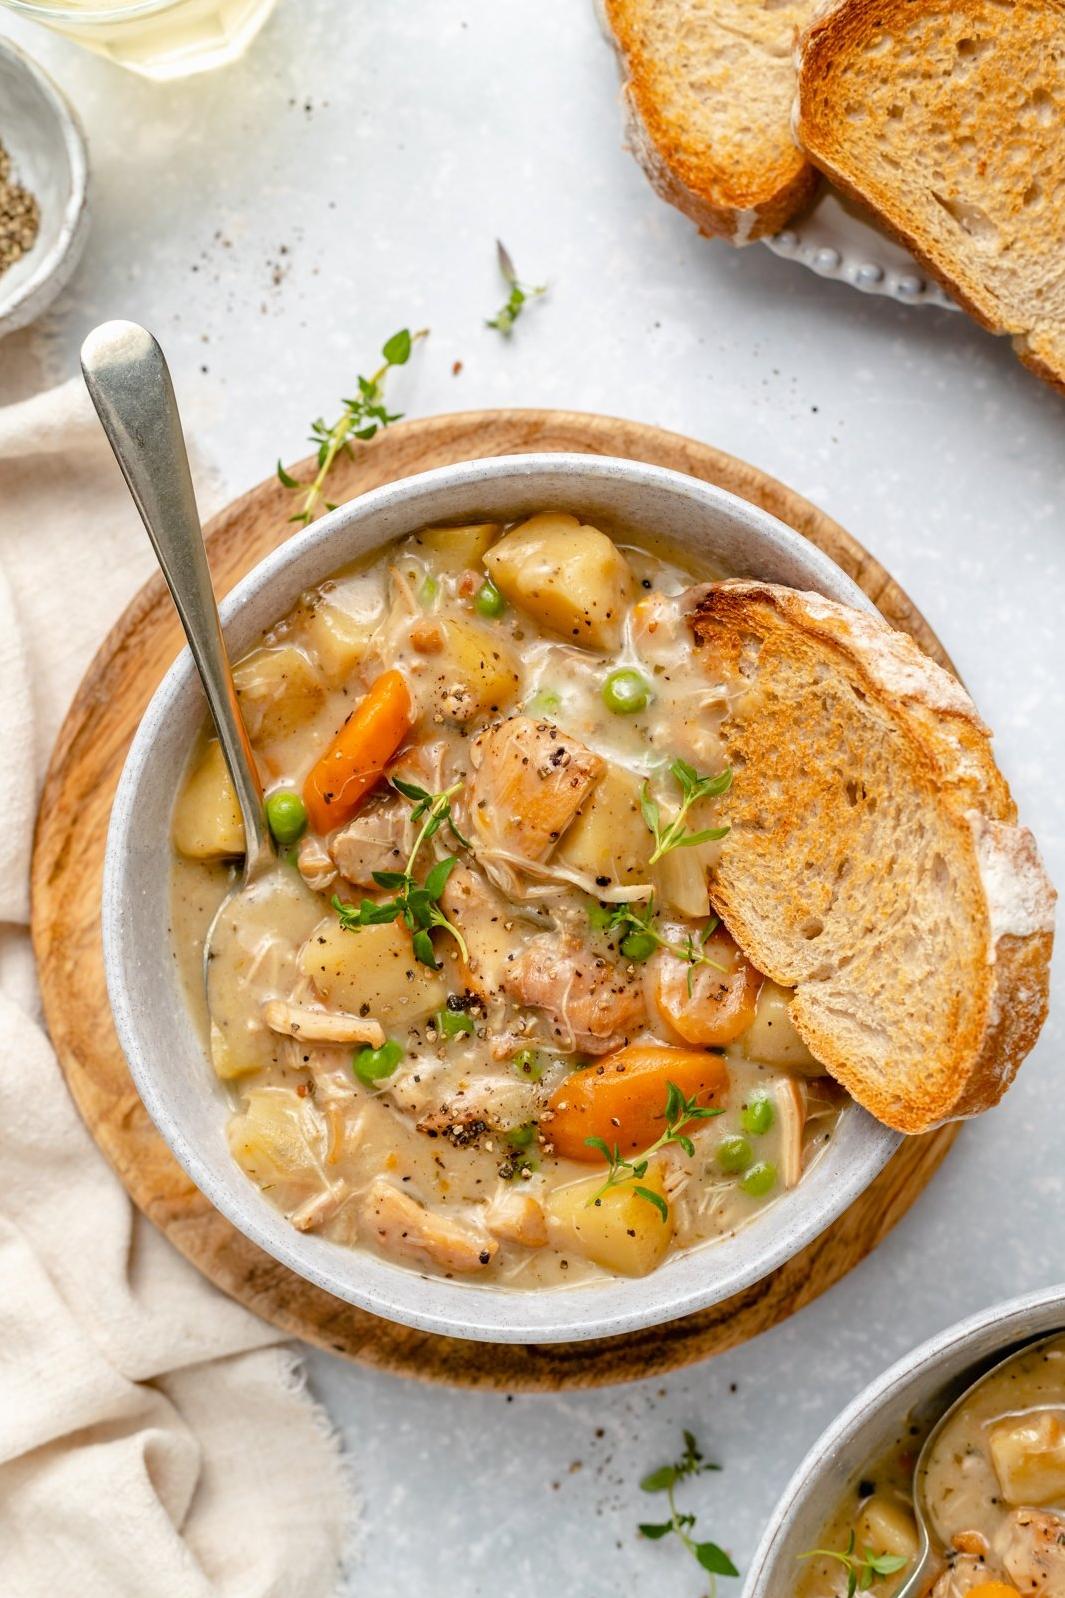  A perfect winter dinner option is the Chicken stew with white wine